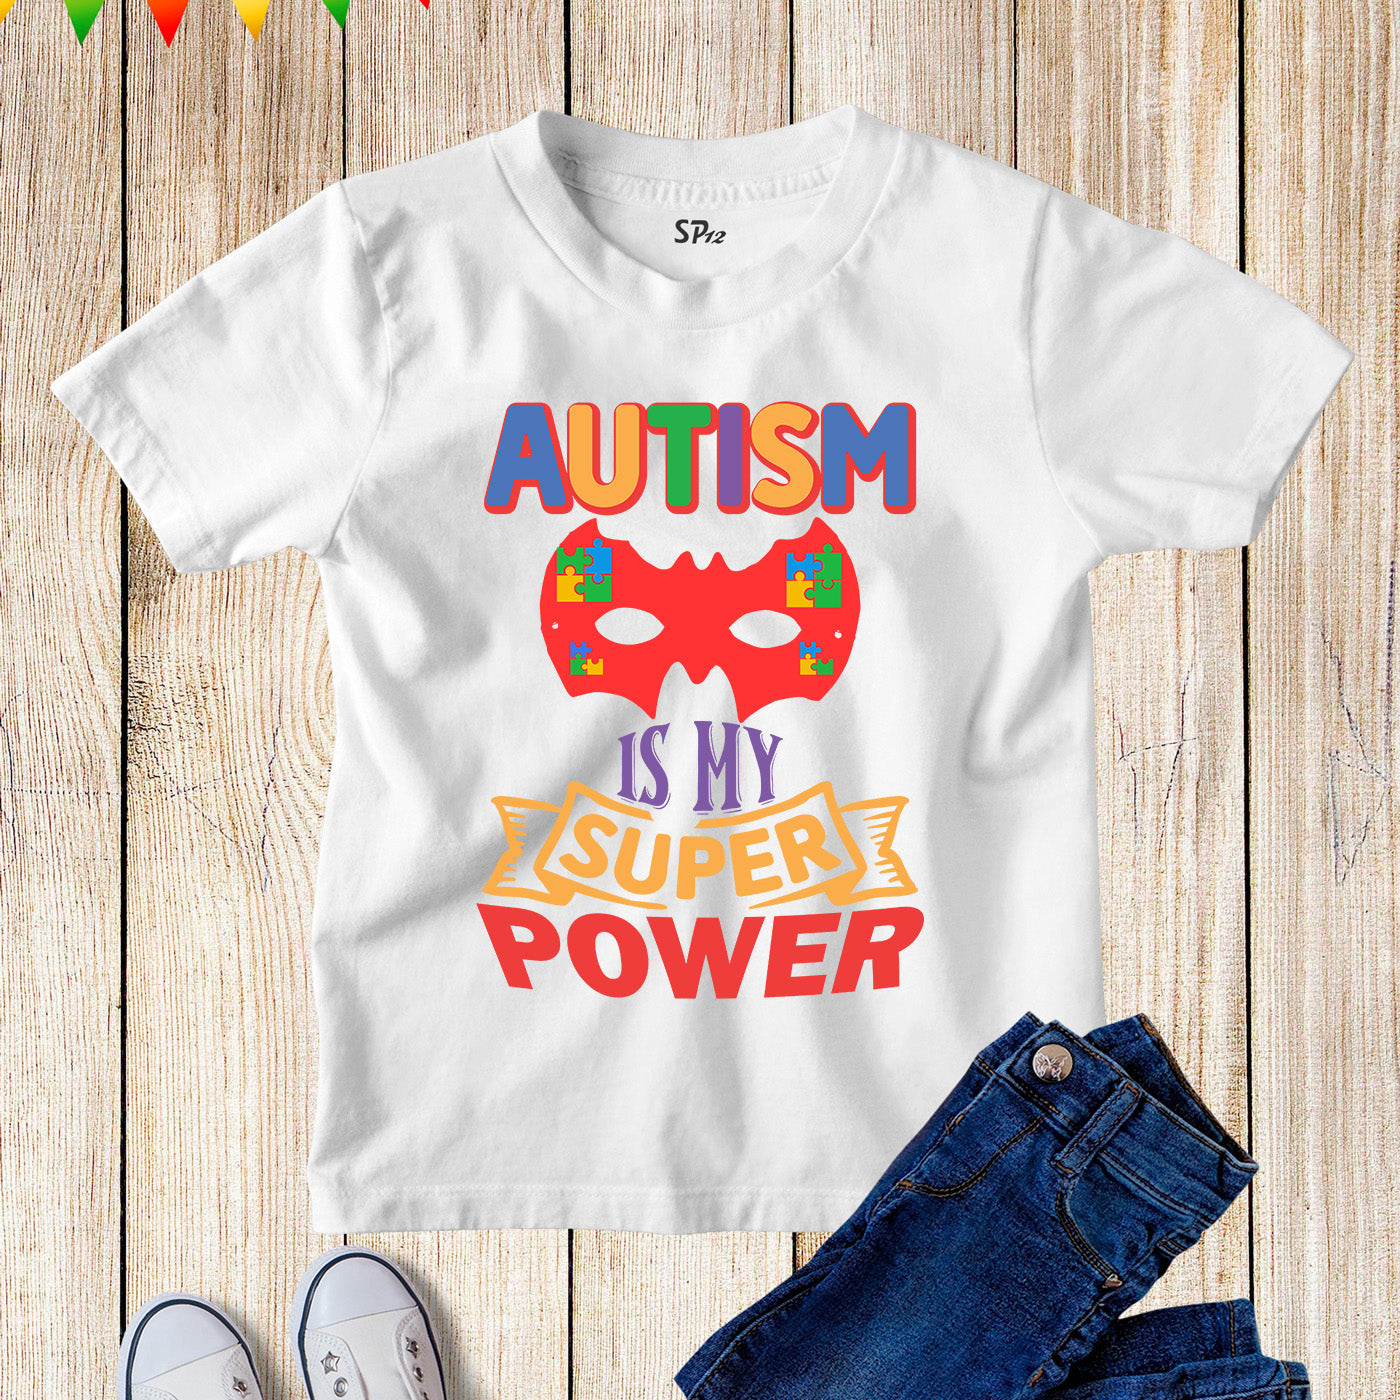 Autism is My Superpower T Shirt